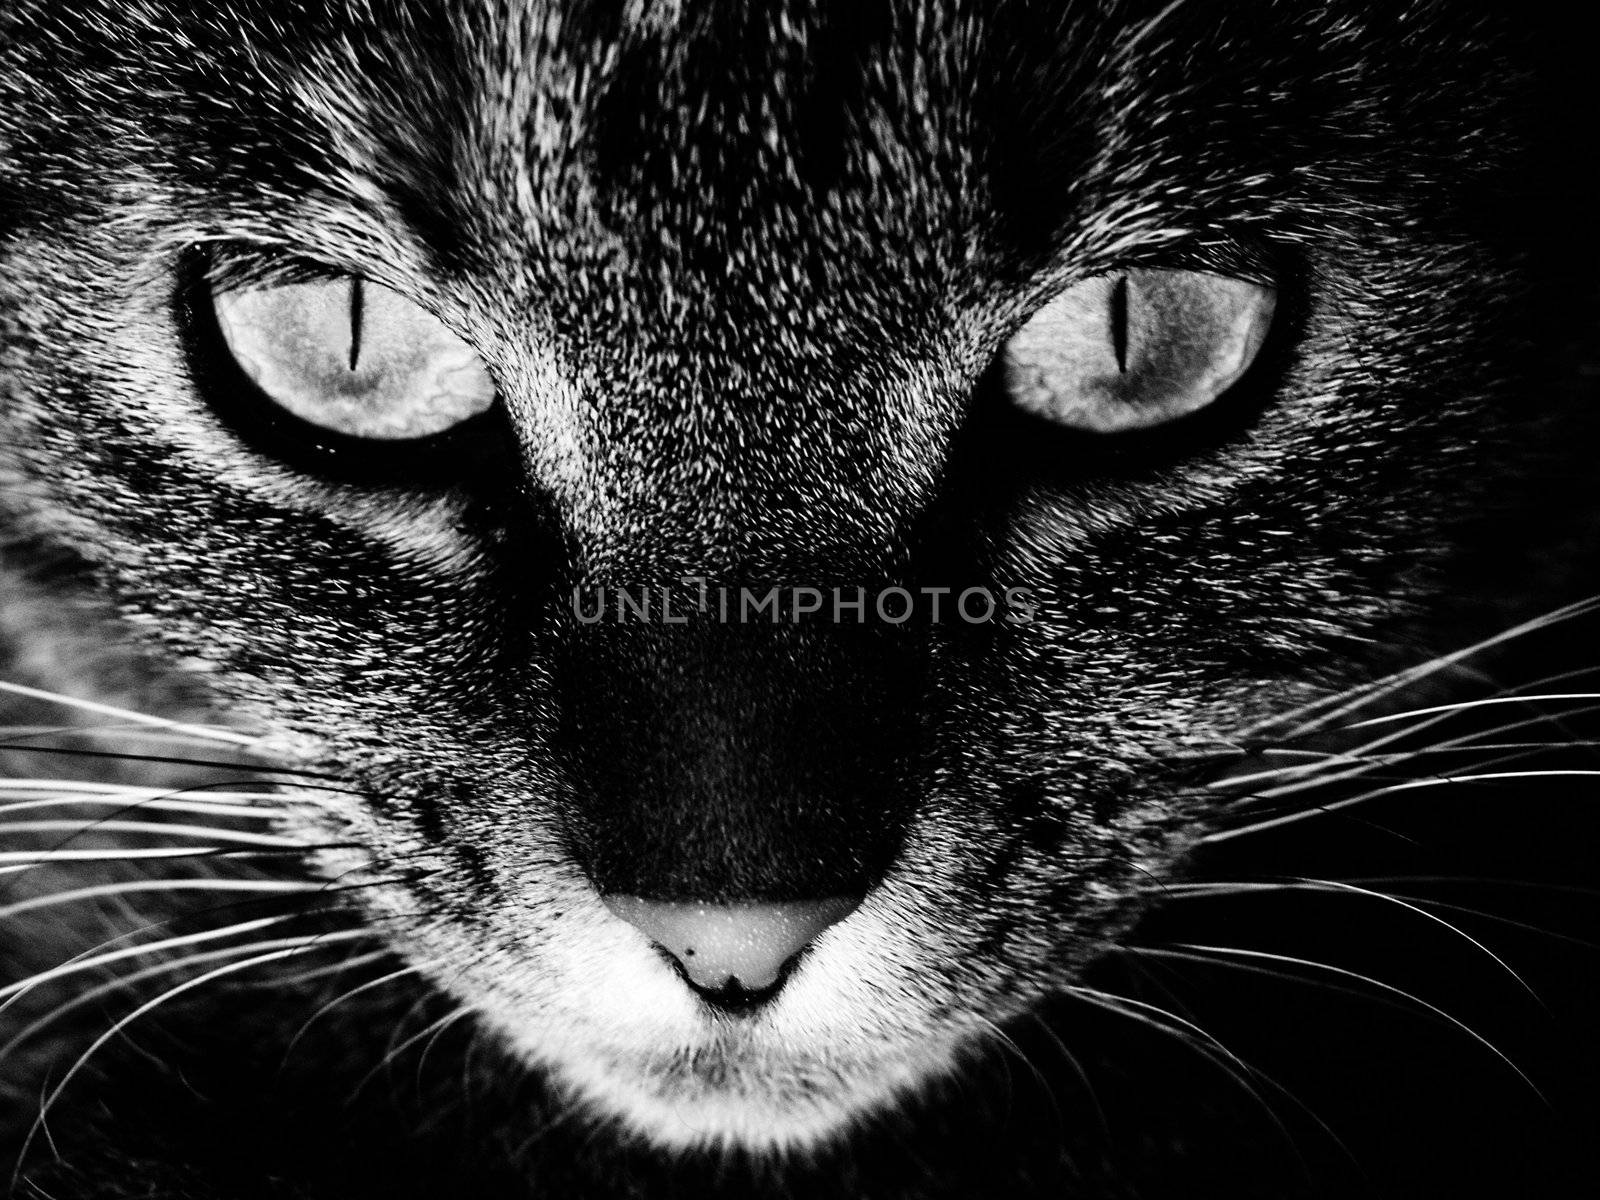 The face of a cat in black and white.